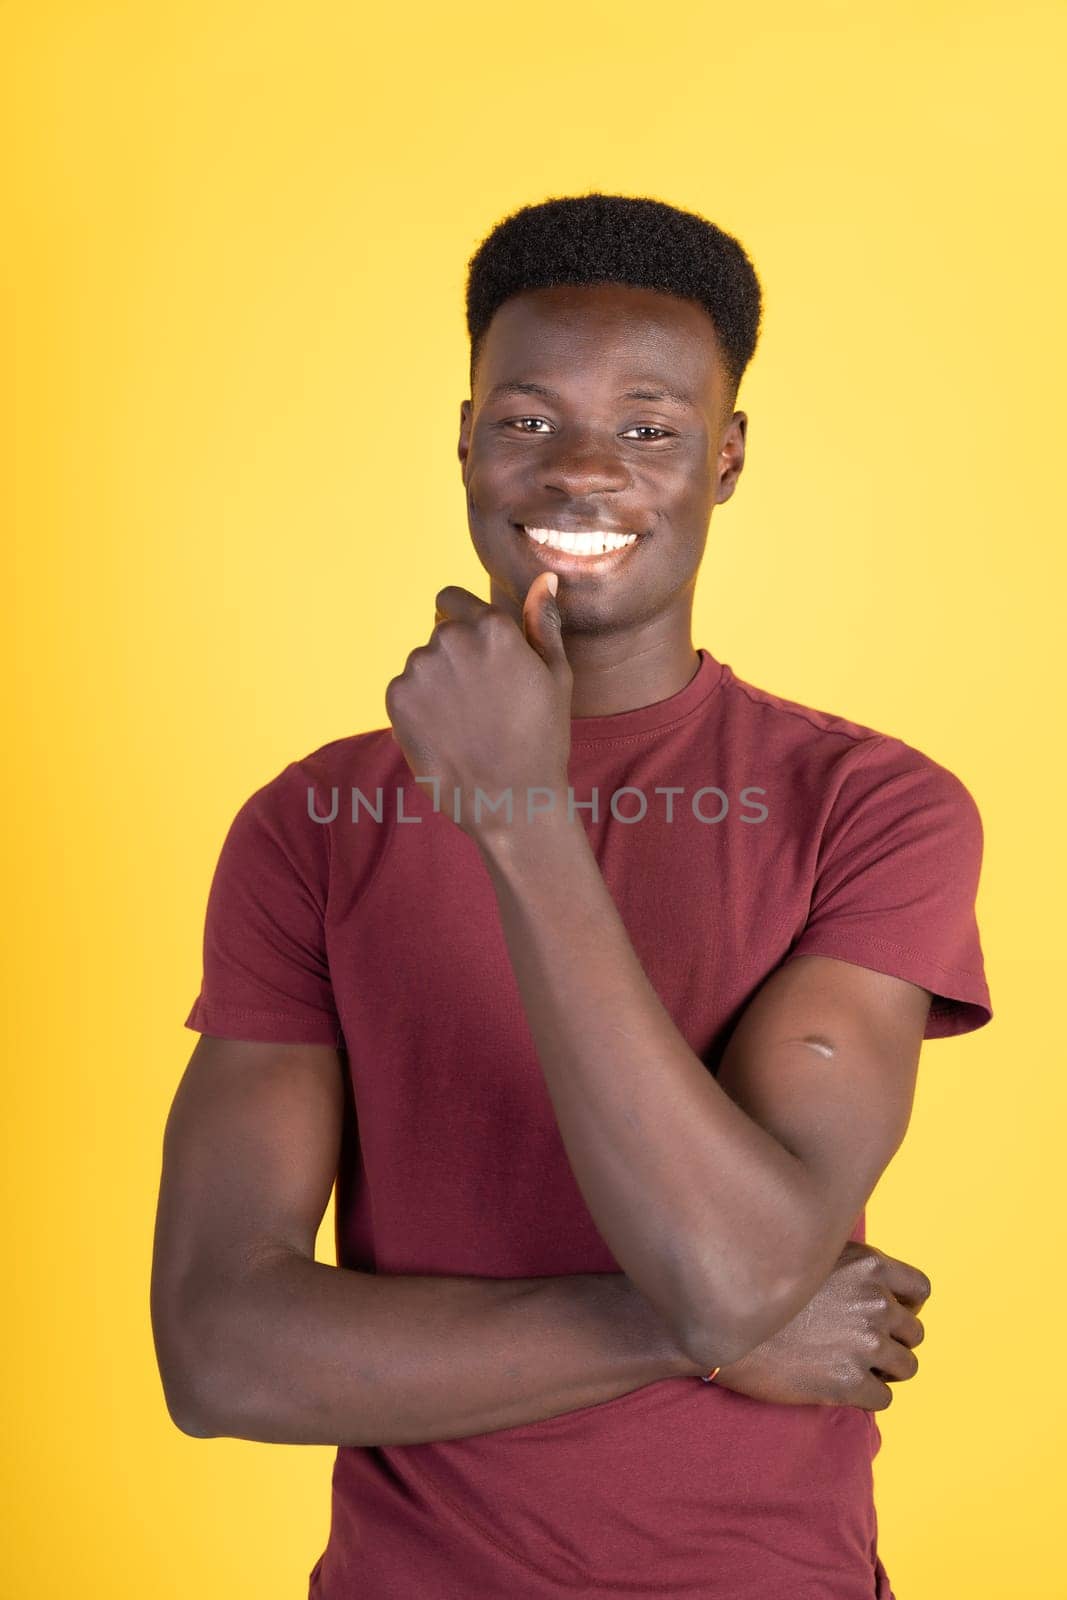 A young man in a red shirt is posing for a picture with his hands crossed. He has a smile on his face and he is thinking